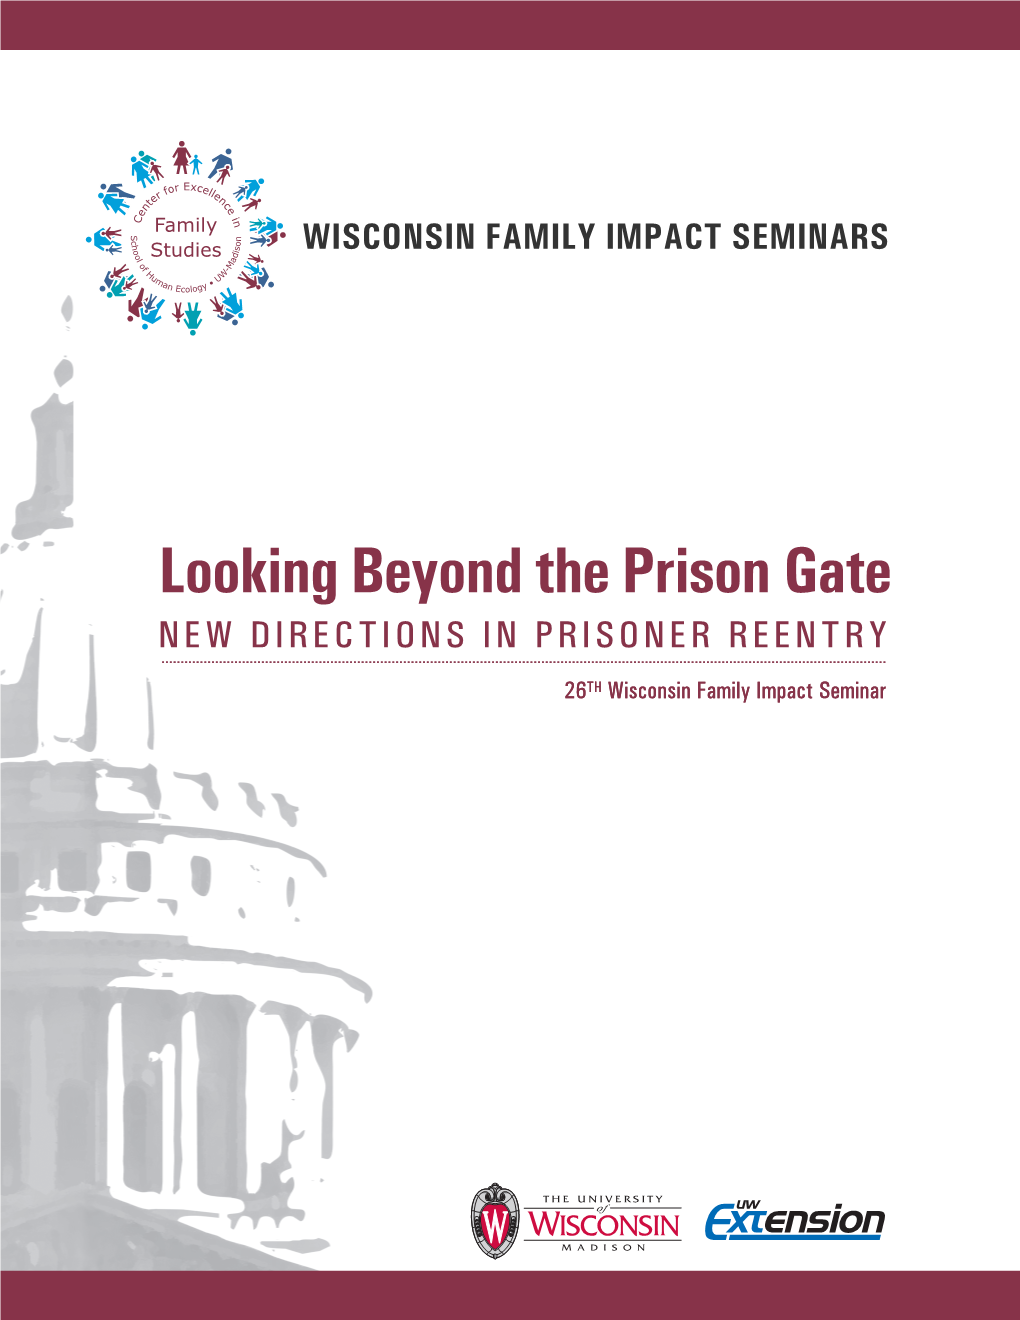 Looking Beyond the Prison Gate: New Directions in Prisoner Reentry (Pdf)